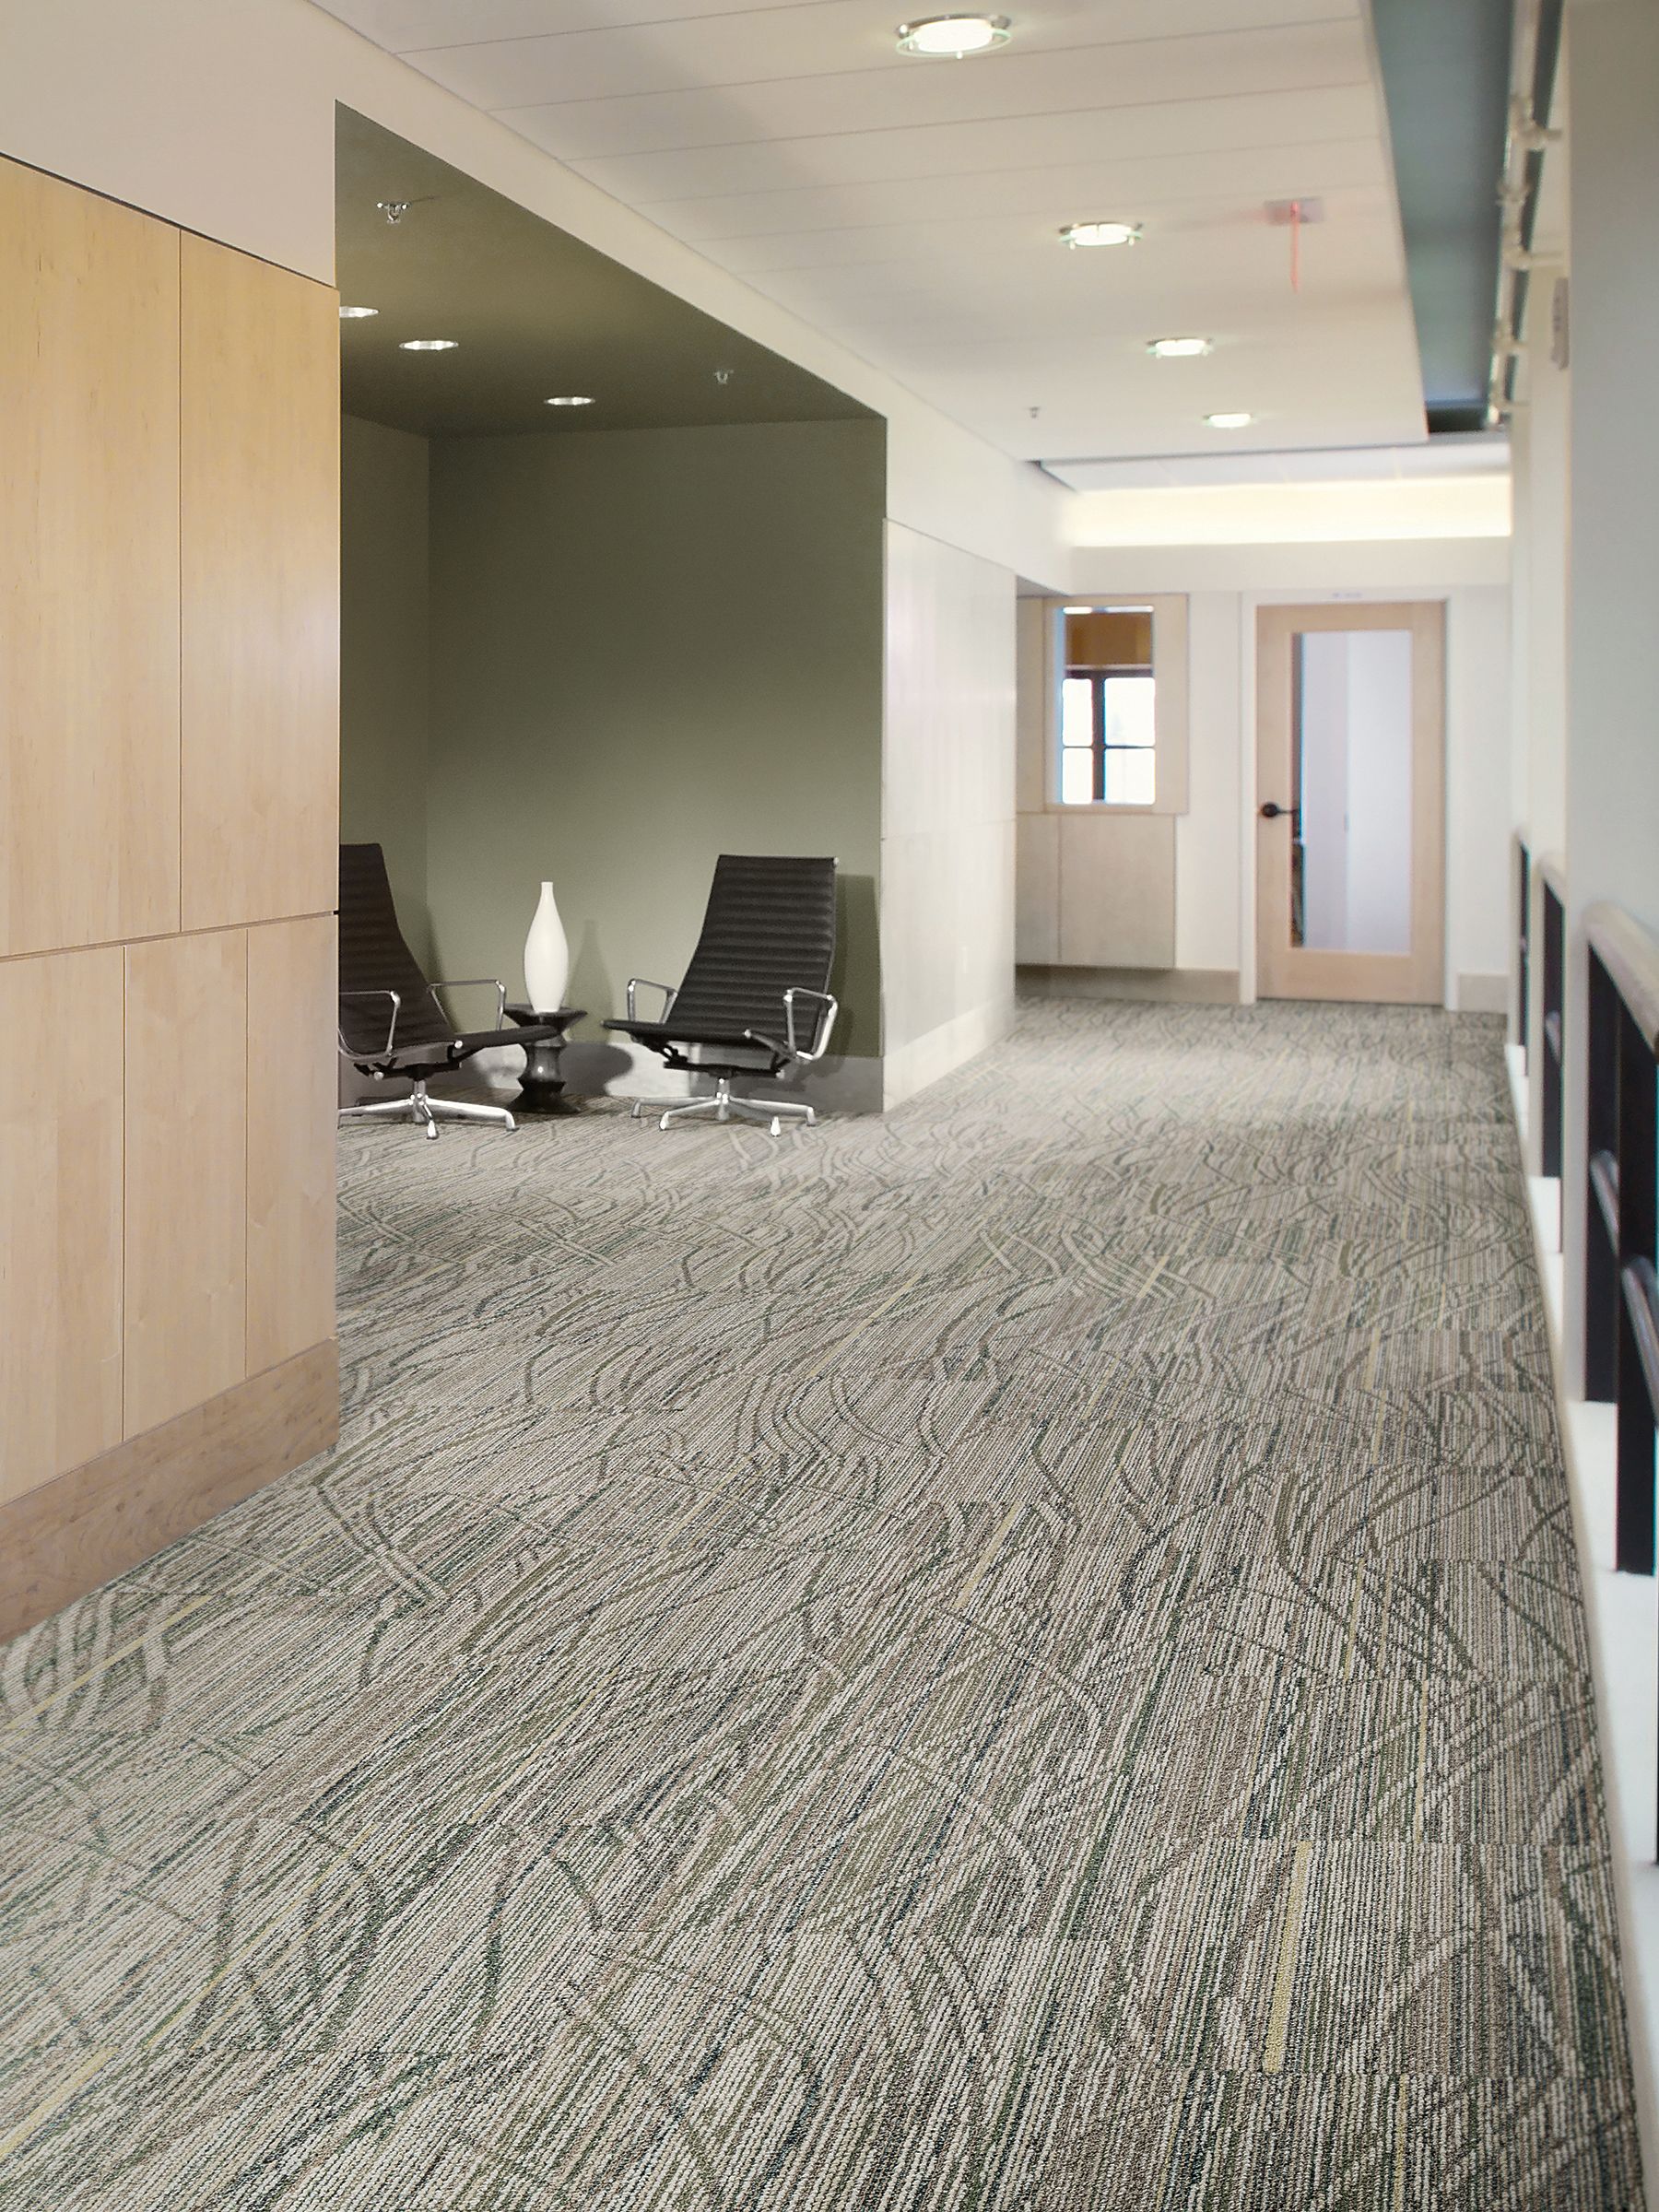 Interface Prairie Grass Loop carpet tile in corridor with seating area on side numéro d’image 8